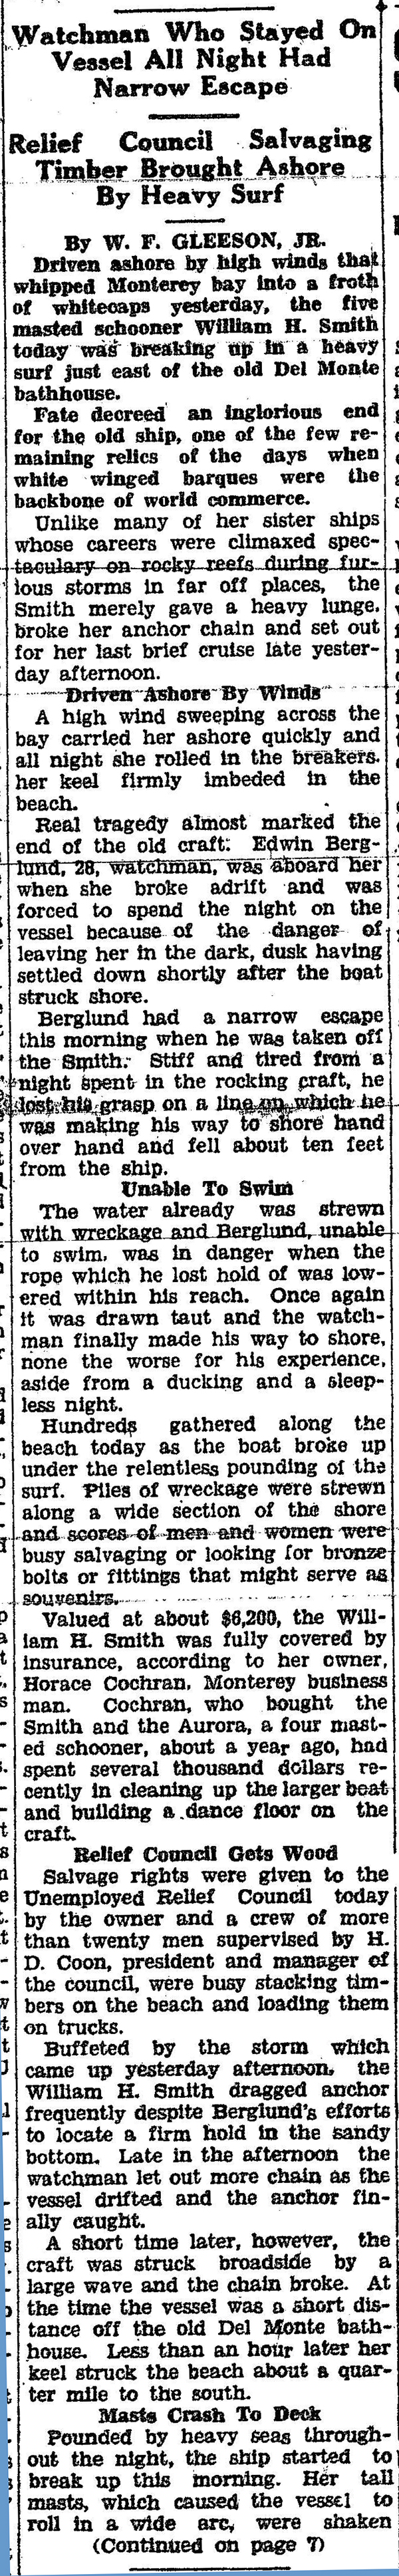 Newspaper clipping p1 from Monterey Peninsula Herald 24FEB1933 of shipwreck William H. Smith 